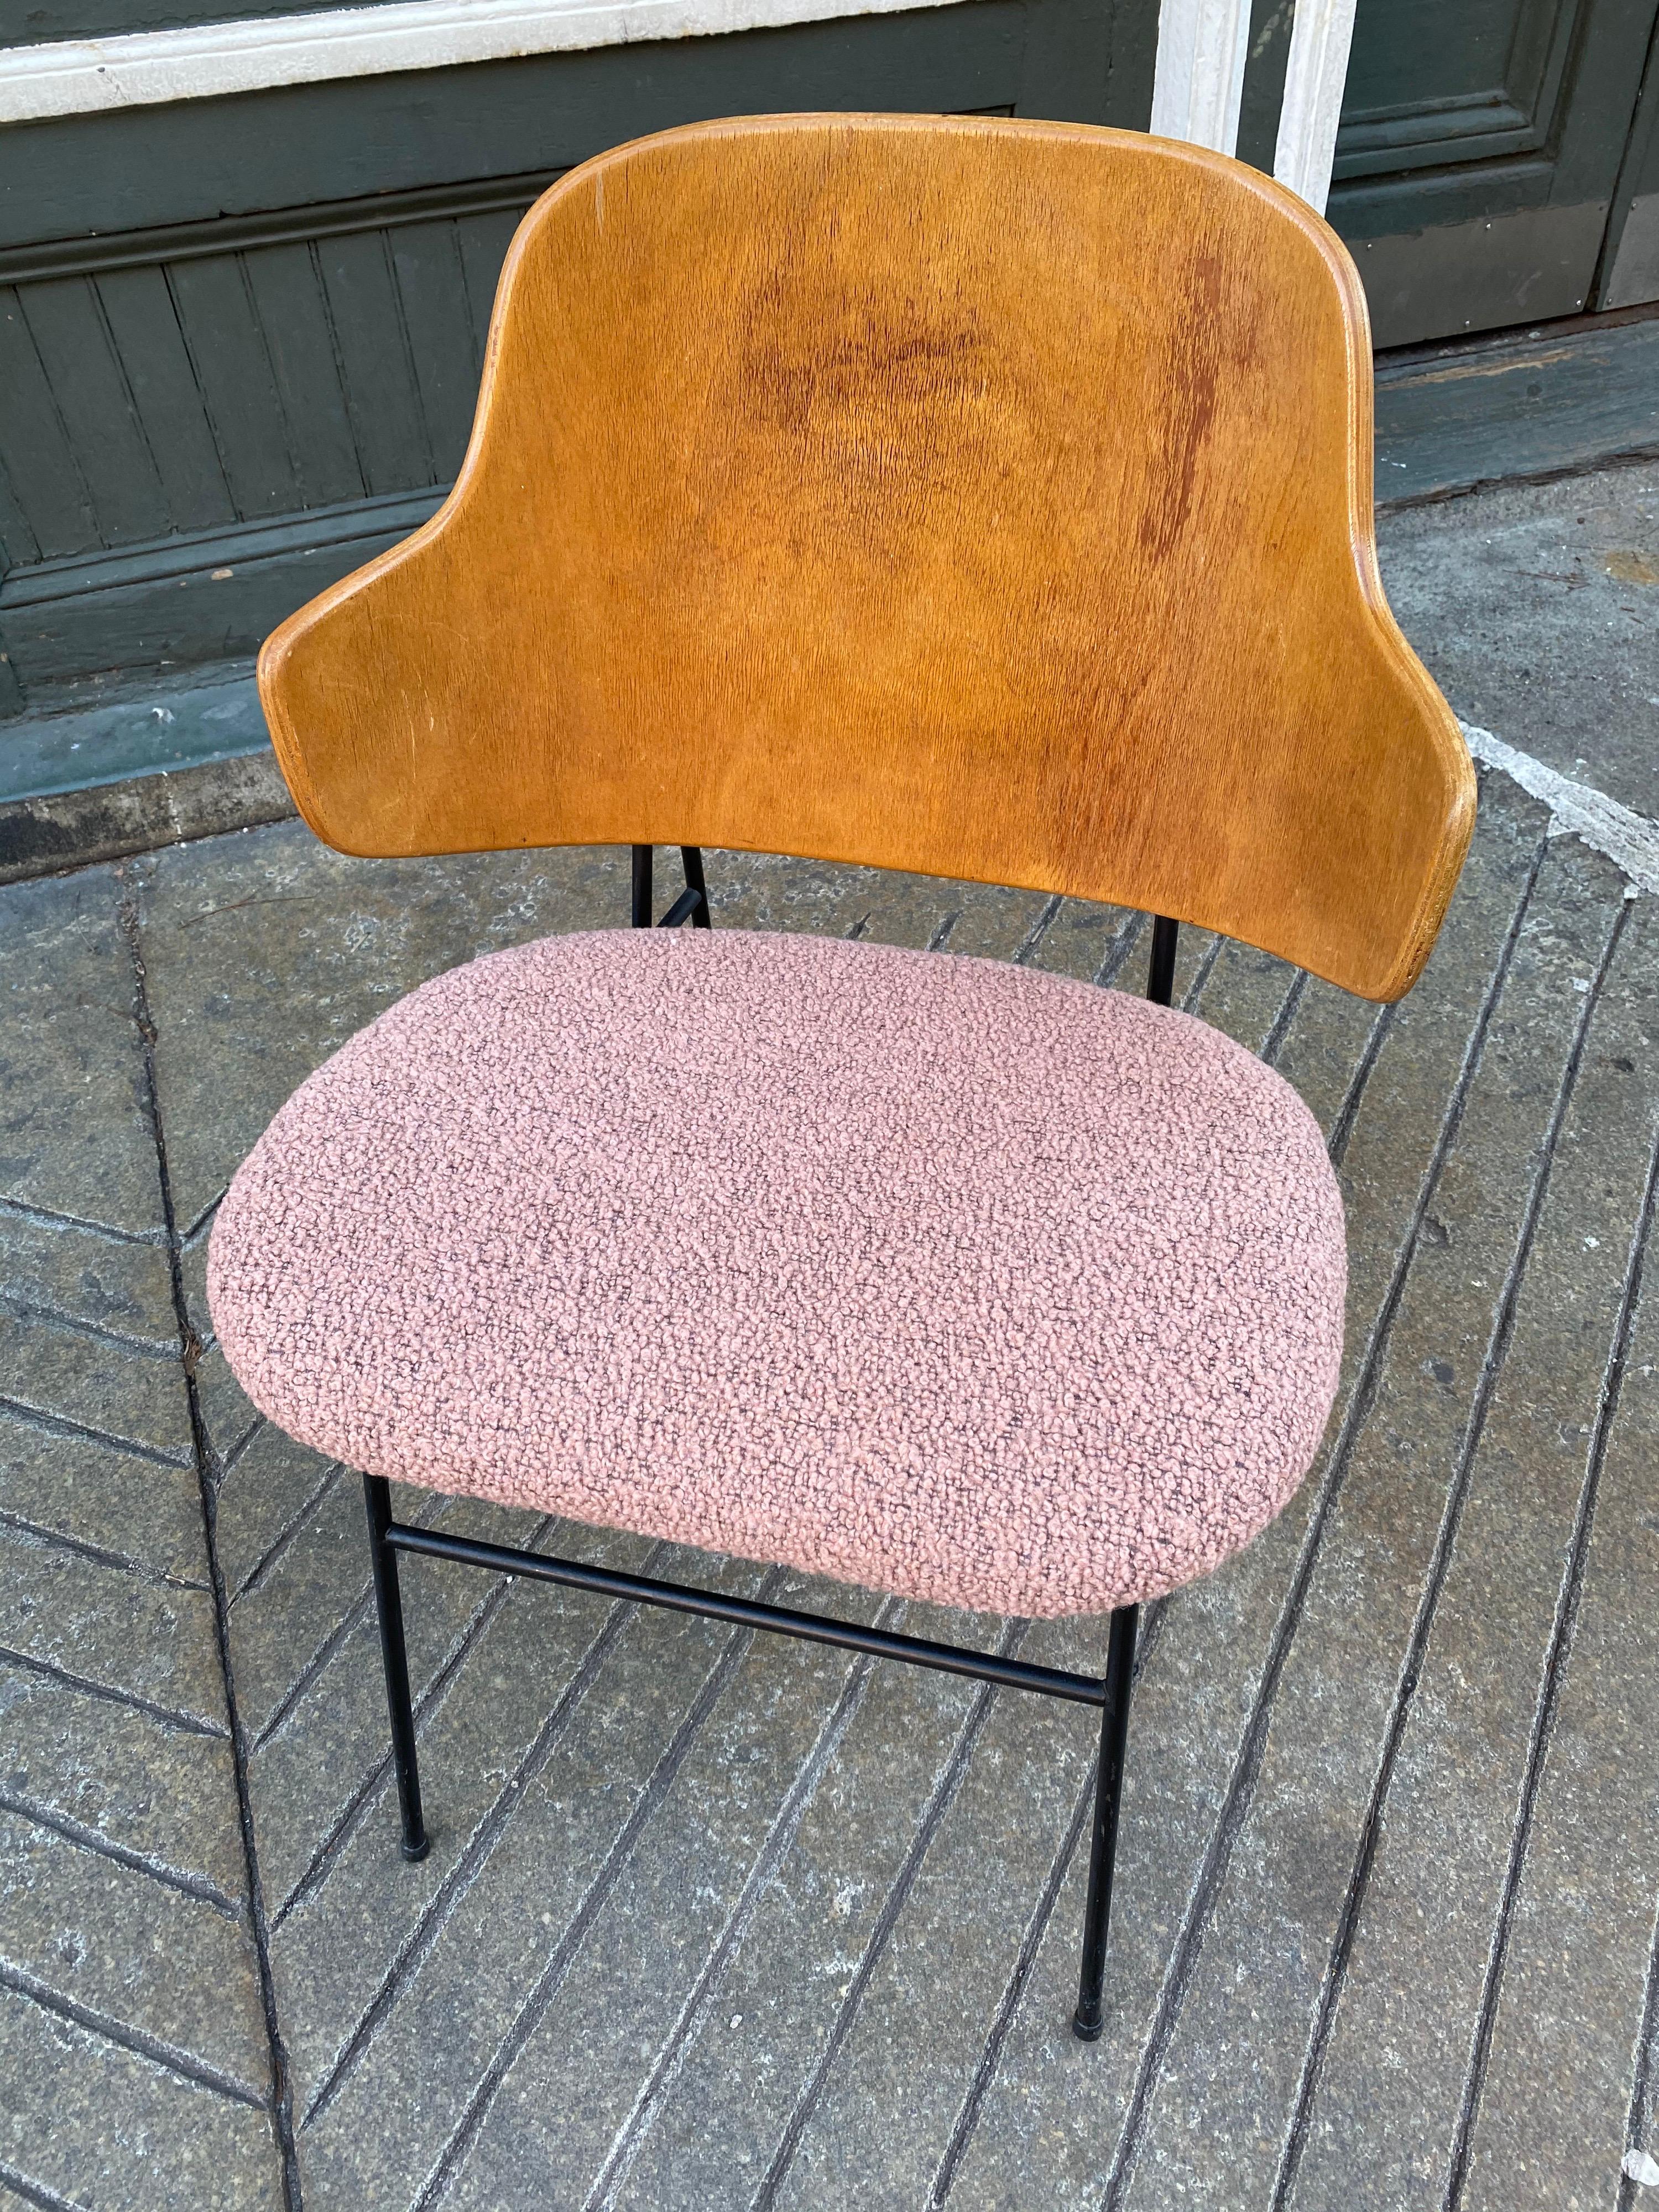 Ib Kofod-Larsen penguin chair with a newly upholstered vintage nubby salmon colored seat. Wood finish is original and shows a little finish loss, but still presents very well. Iron frame in good shape and retains all plastic feet. Stamped made in